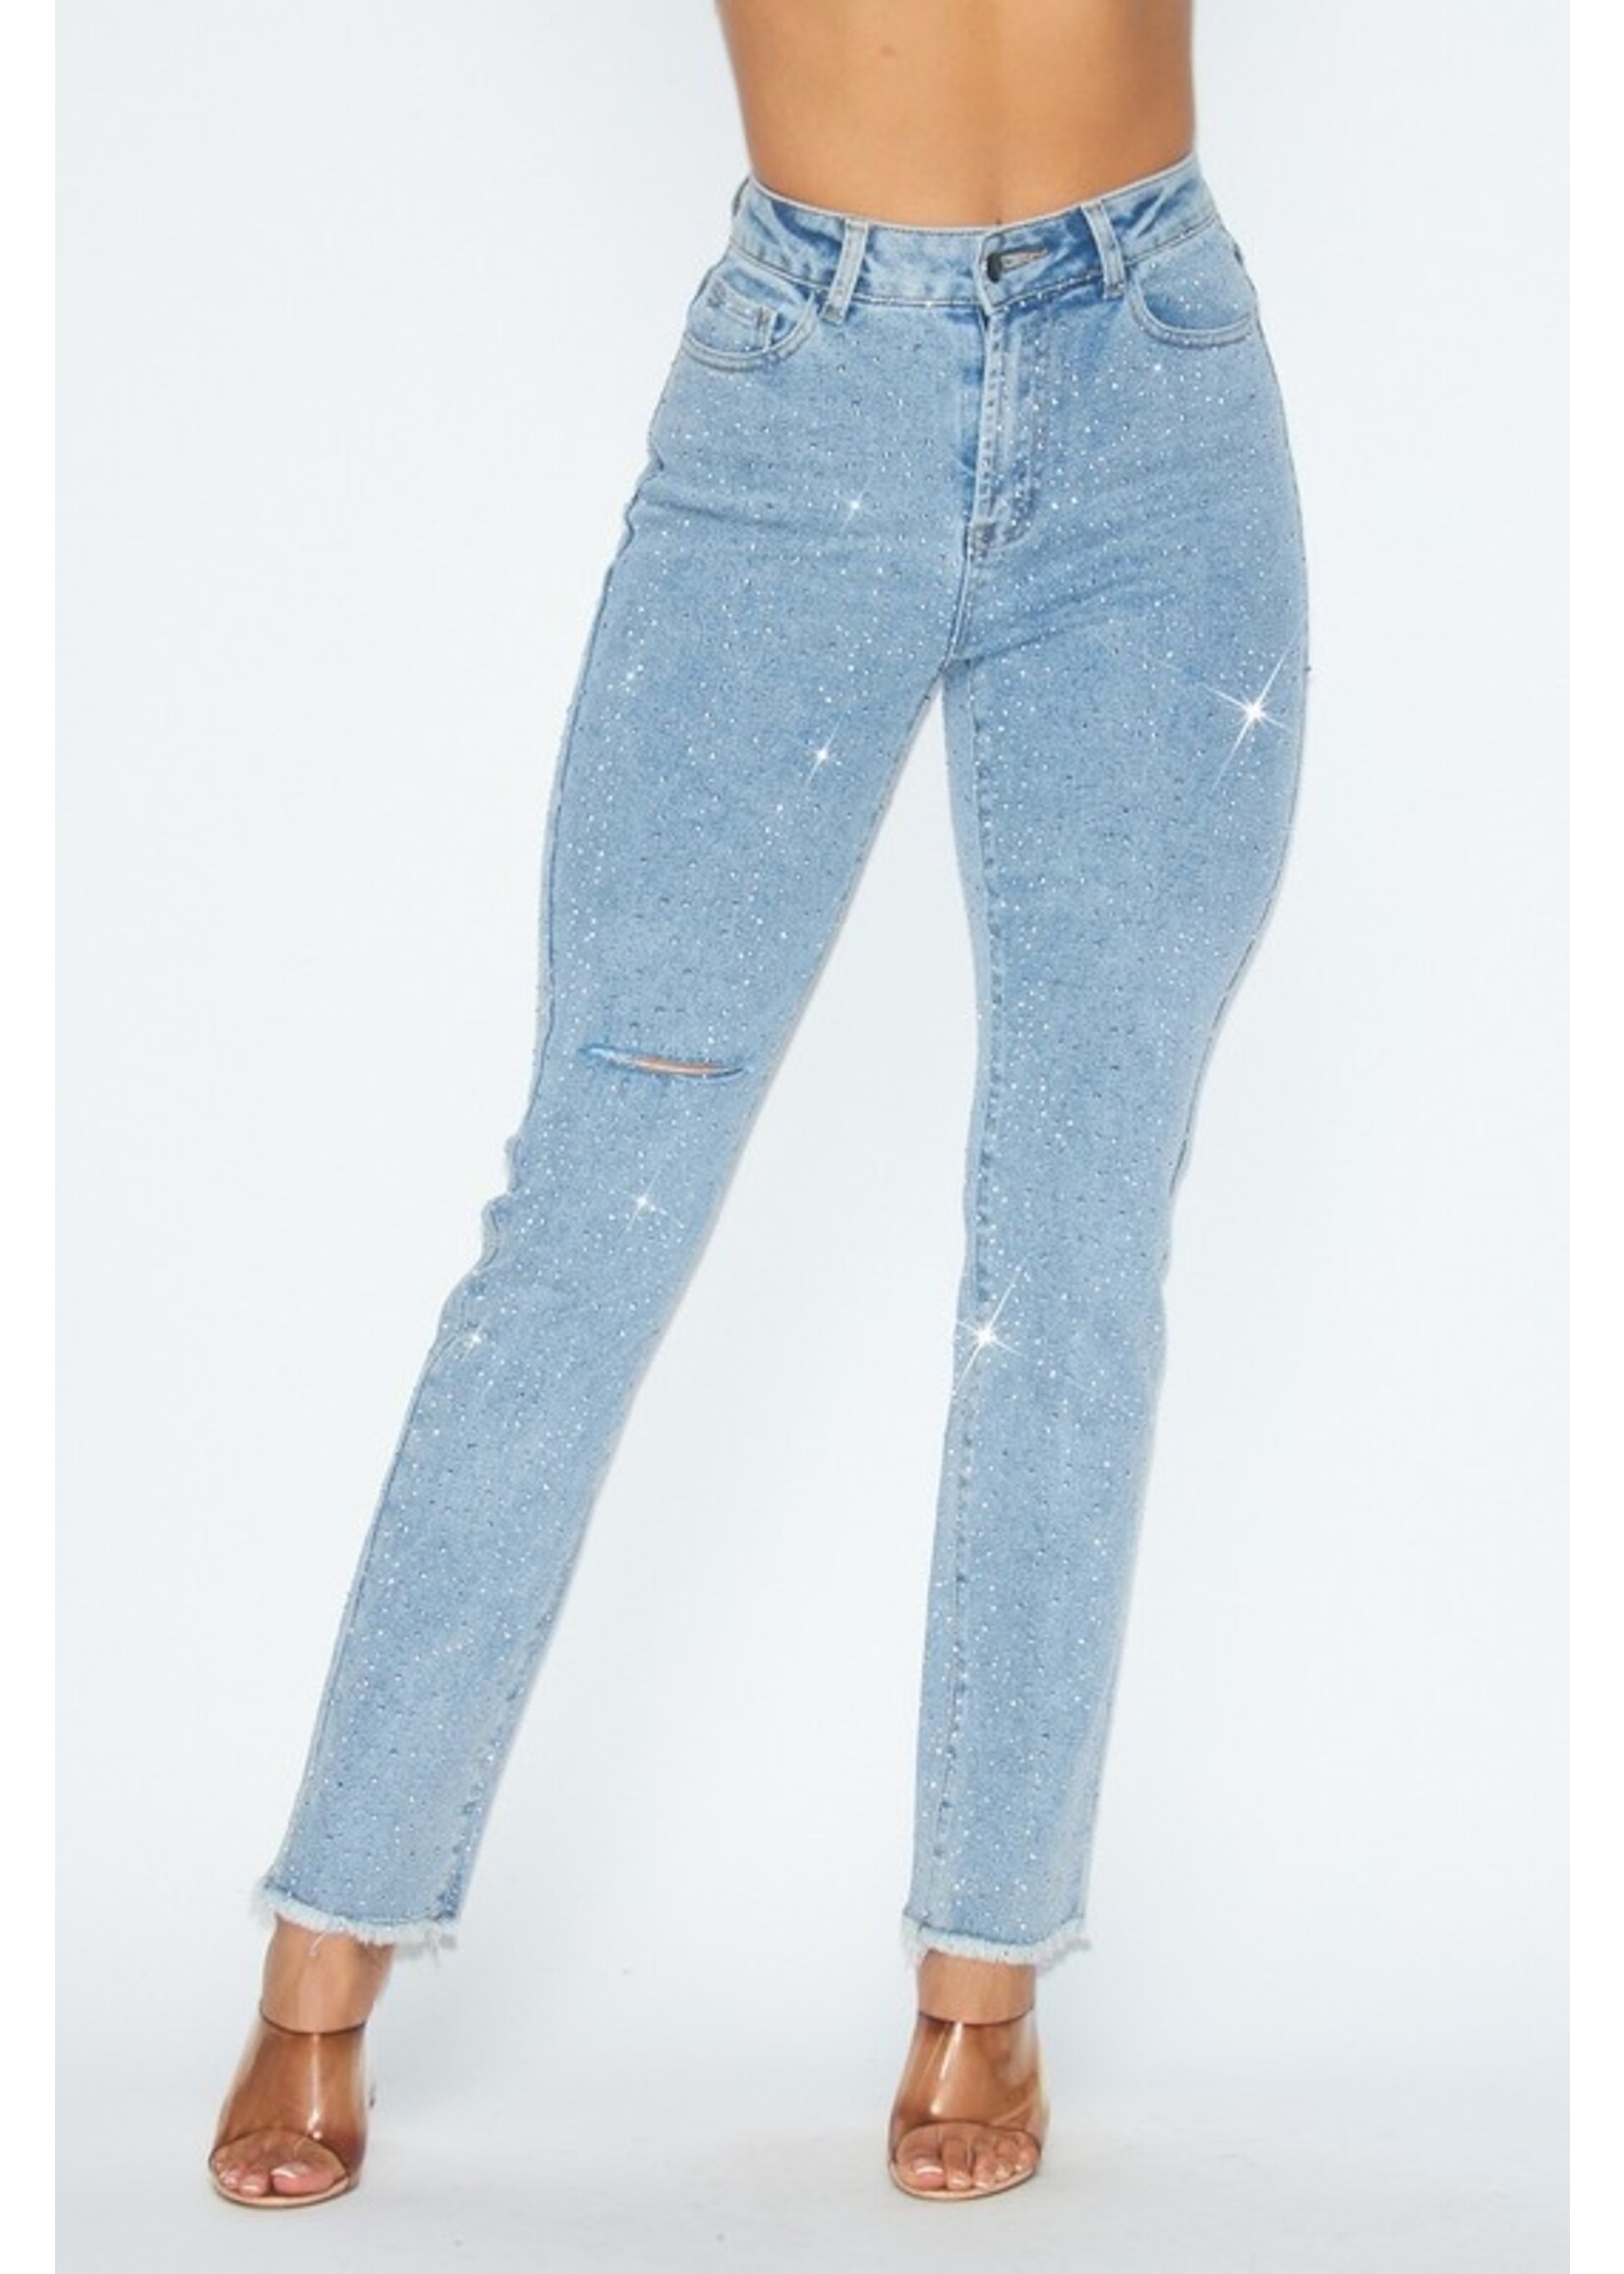 HOT + DELICIOUS Sparks Rhinestone Distressed Jeans - HGP7843